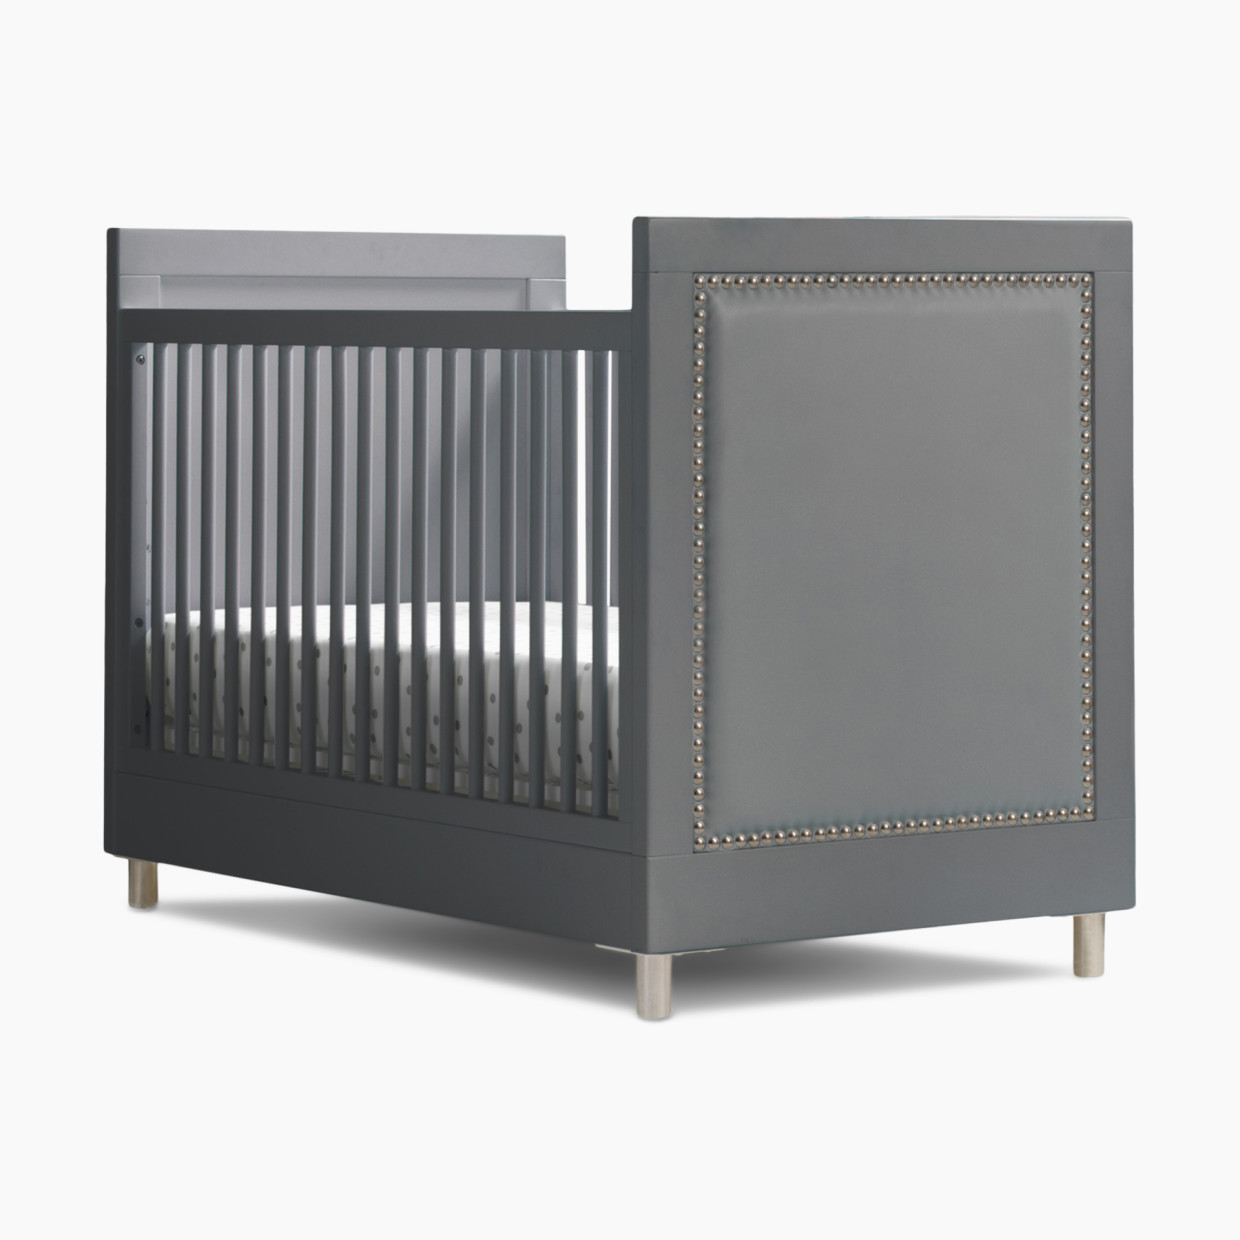 Simmons Kids Avery 3-in-1 Baby Crib with Toddler Bed Conversion Kit - Charcoal Grey.